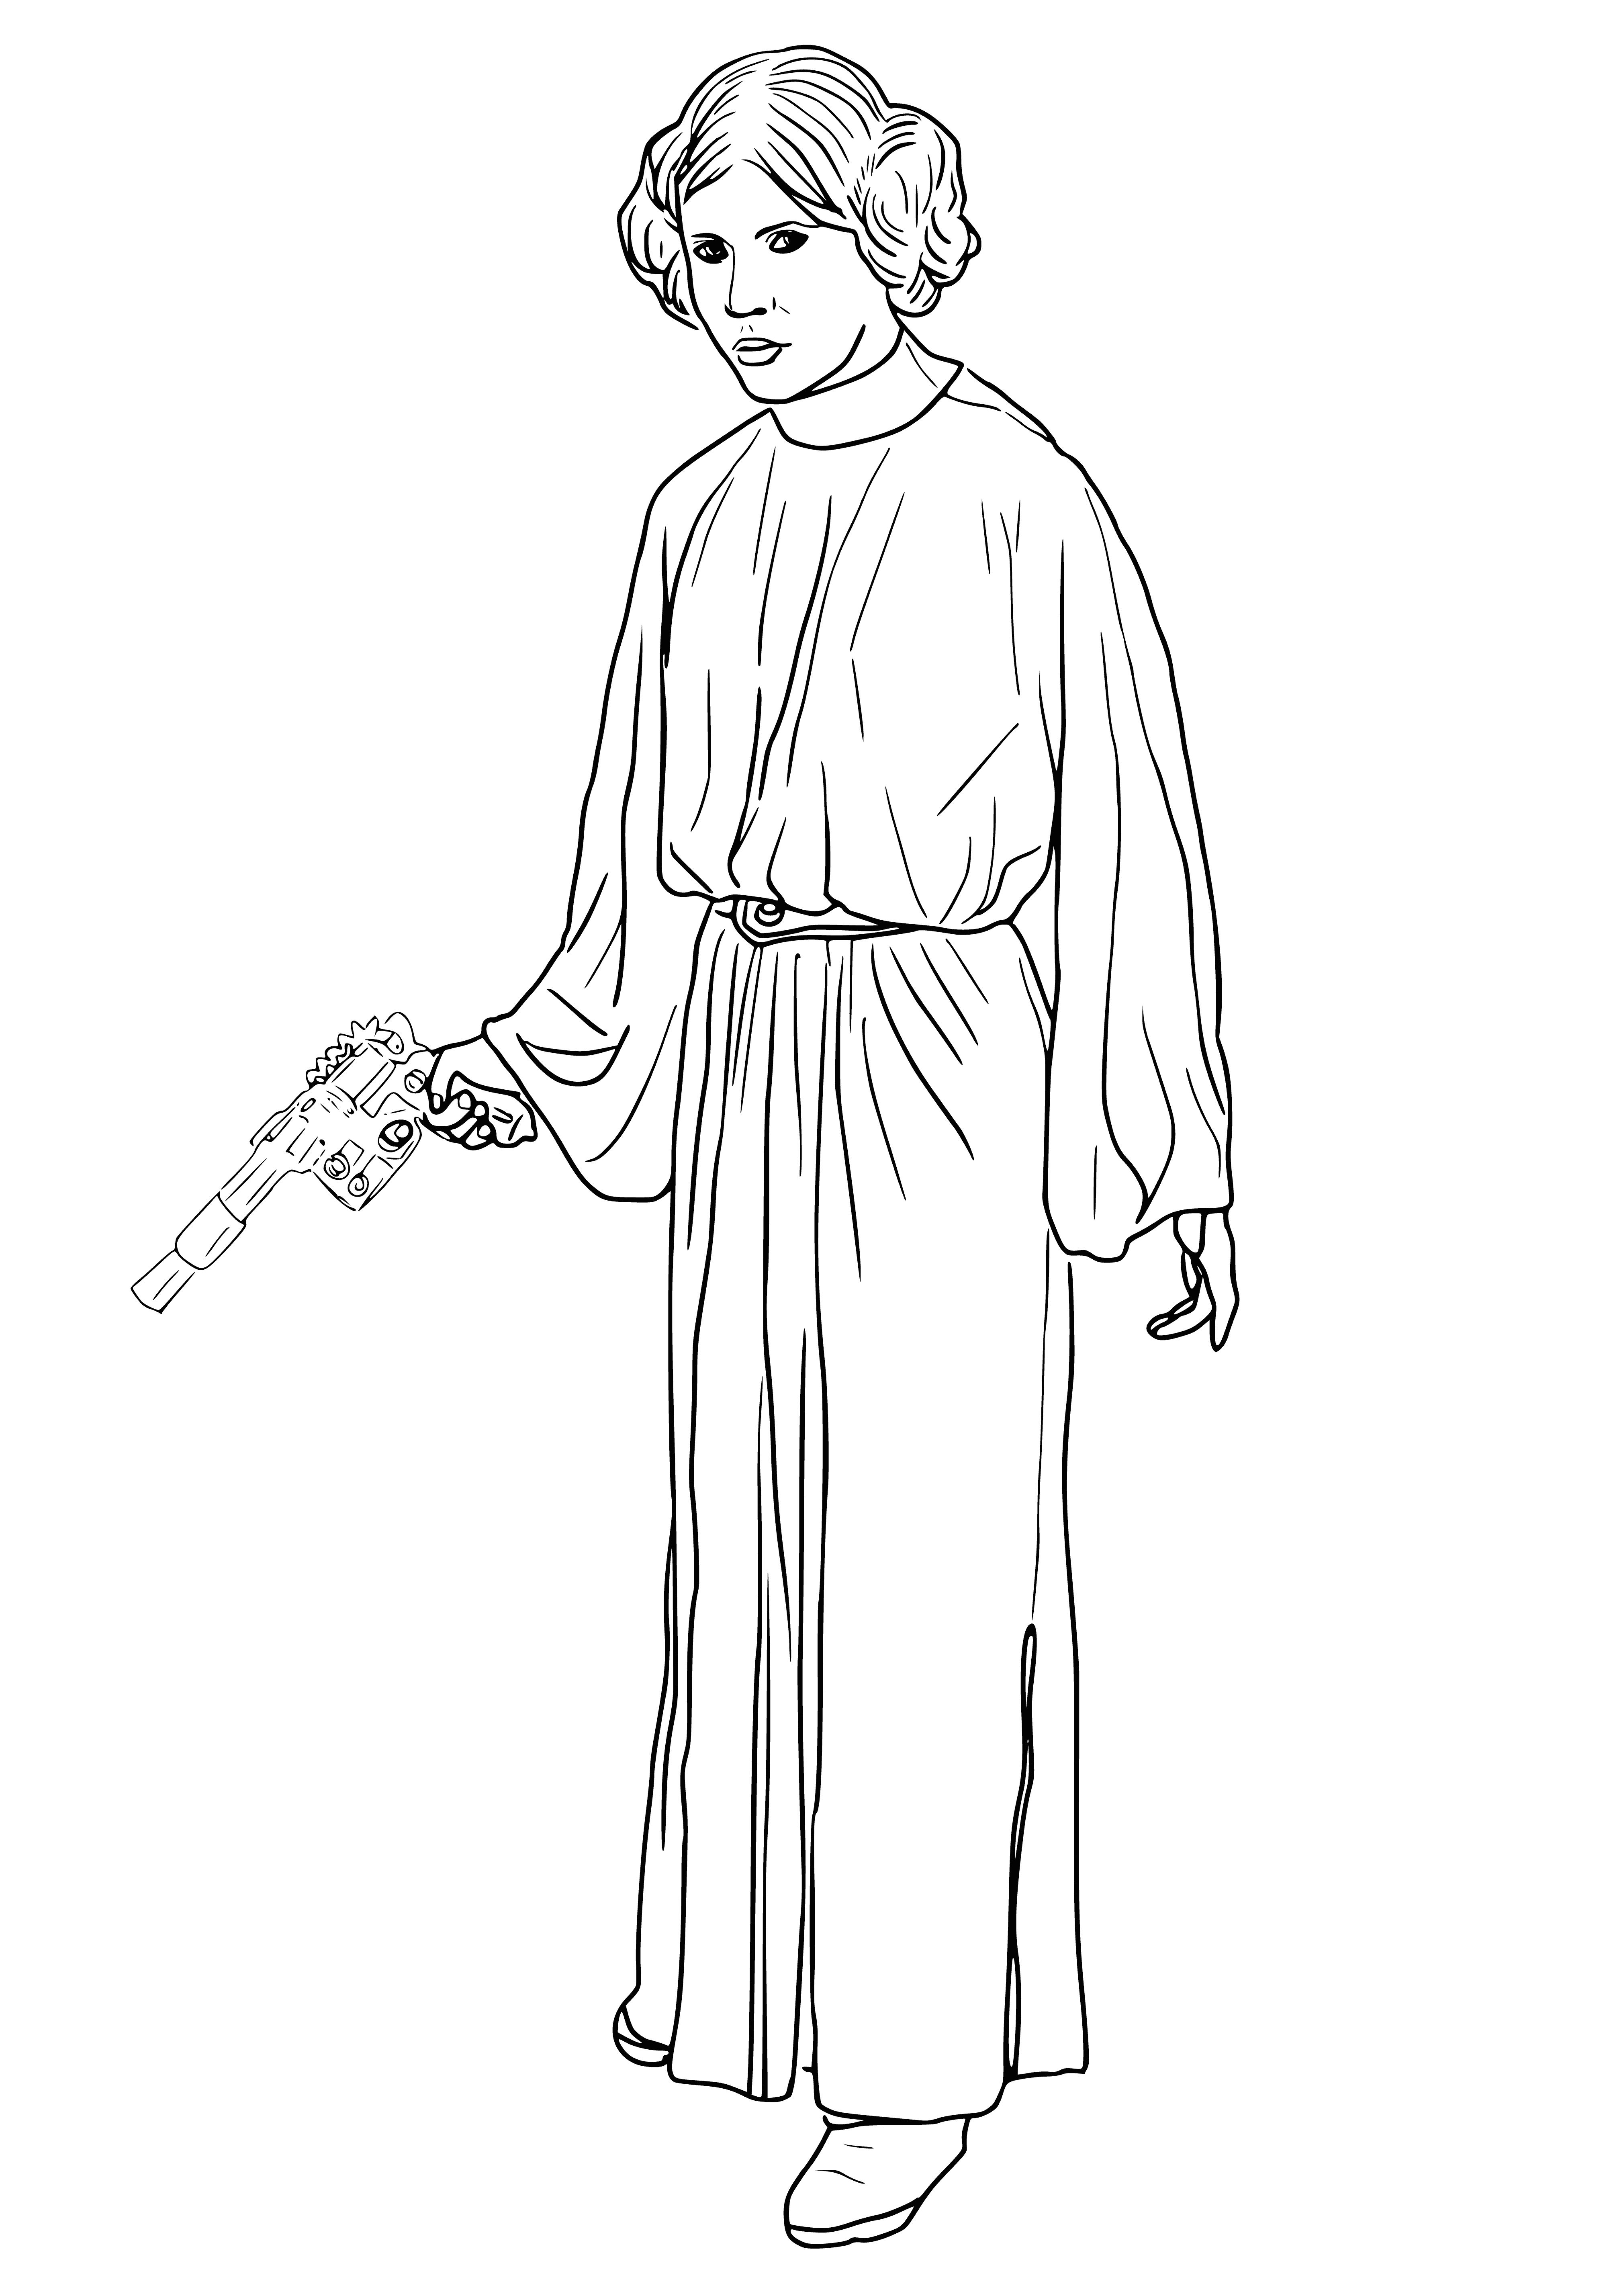 coloring page: Princess Leia stands in the center of a crowd, wearing a light-colored dress and looking off to the side. Her expression is unreadable.